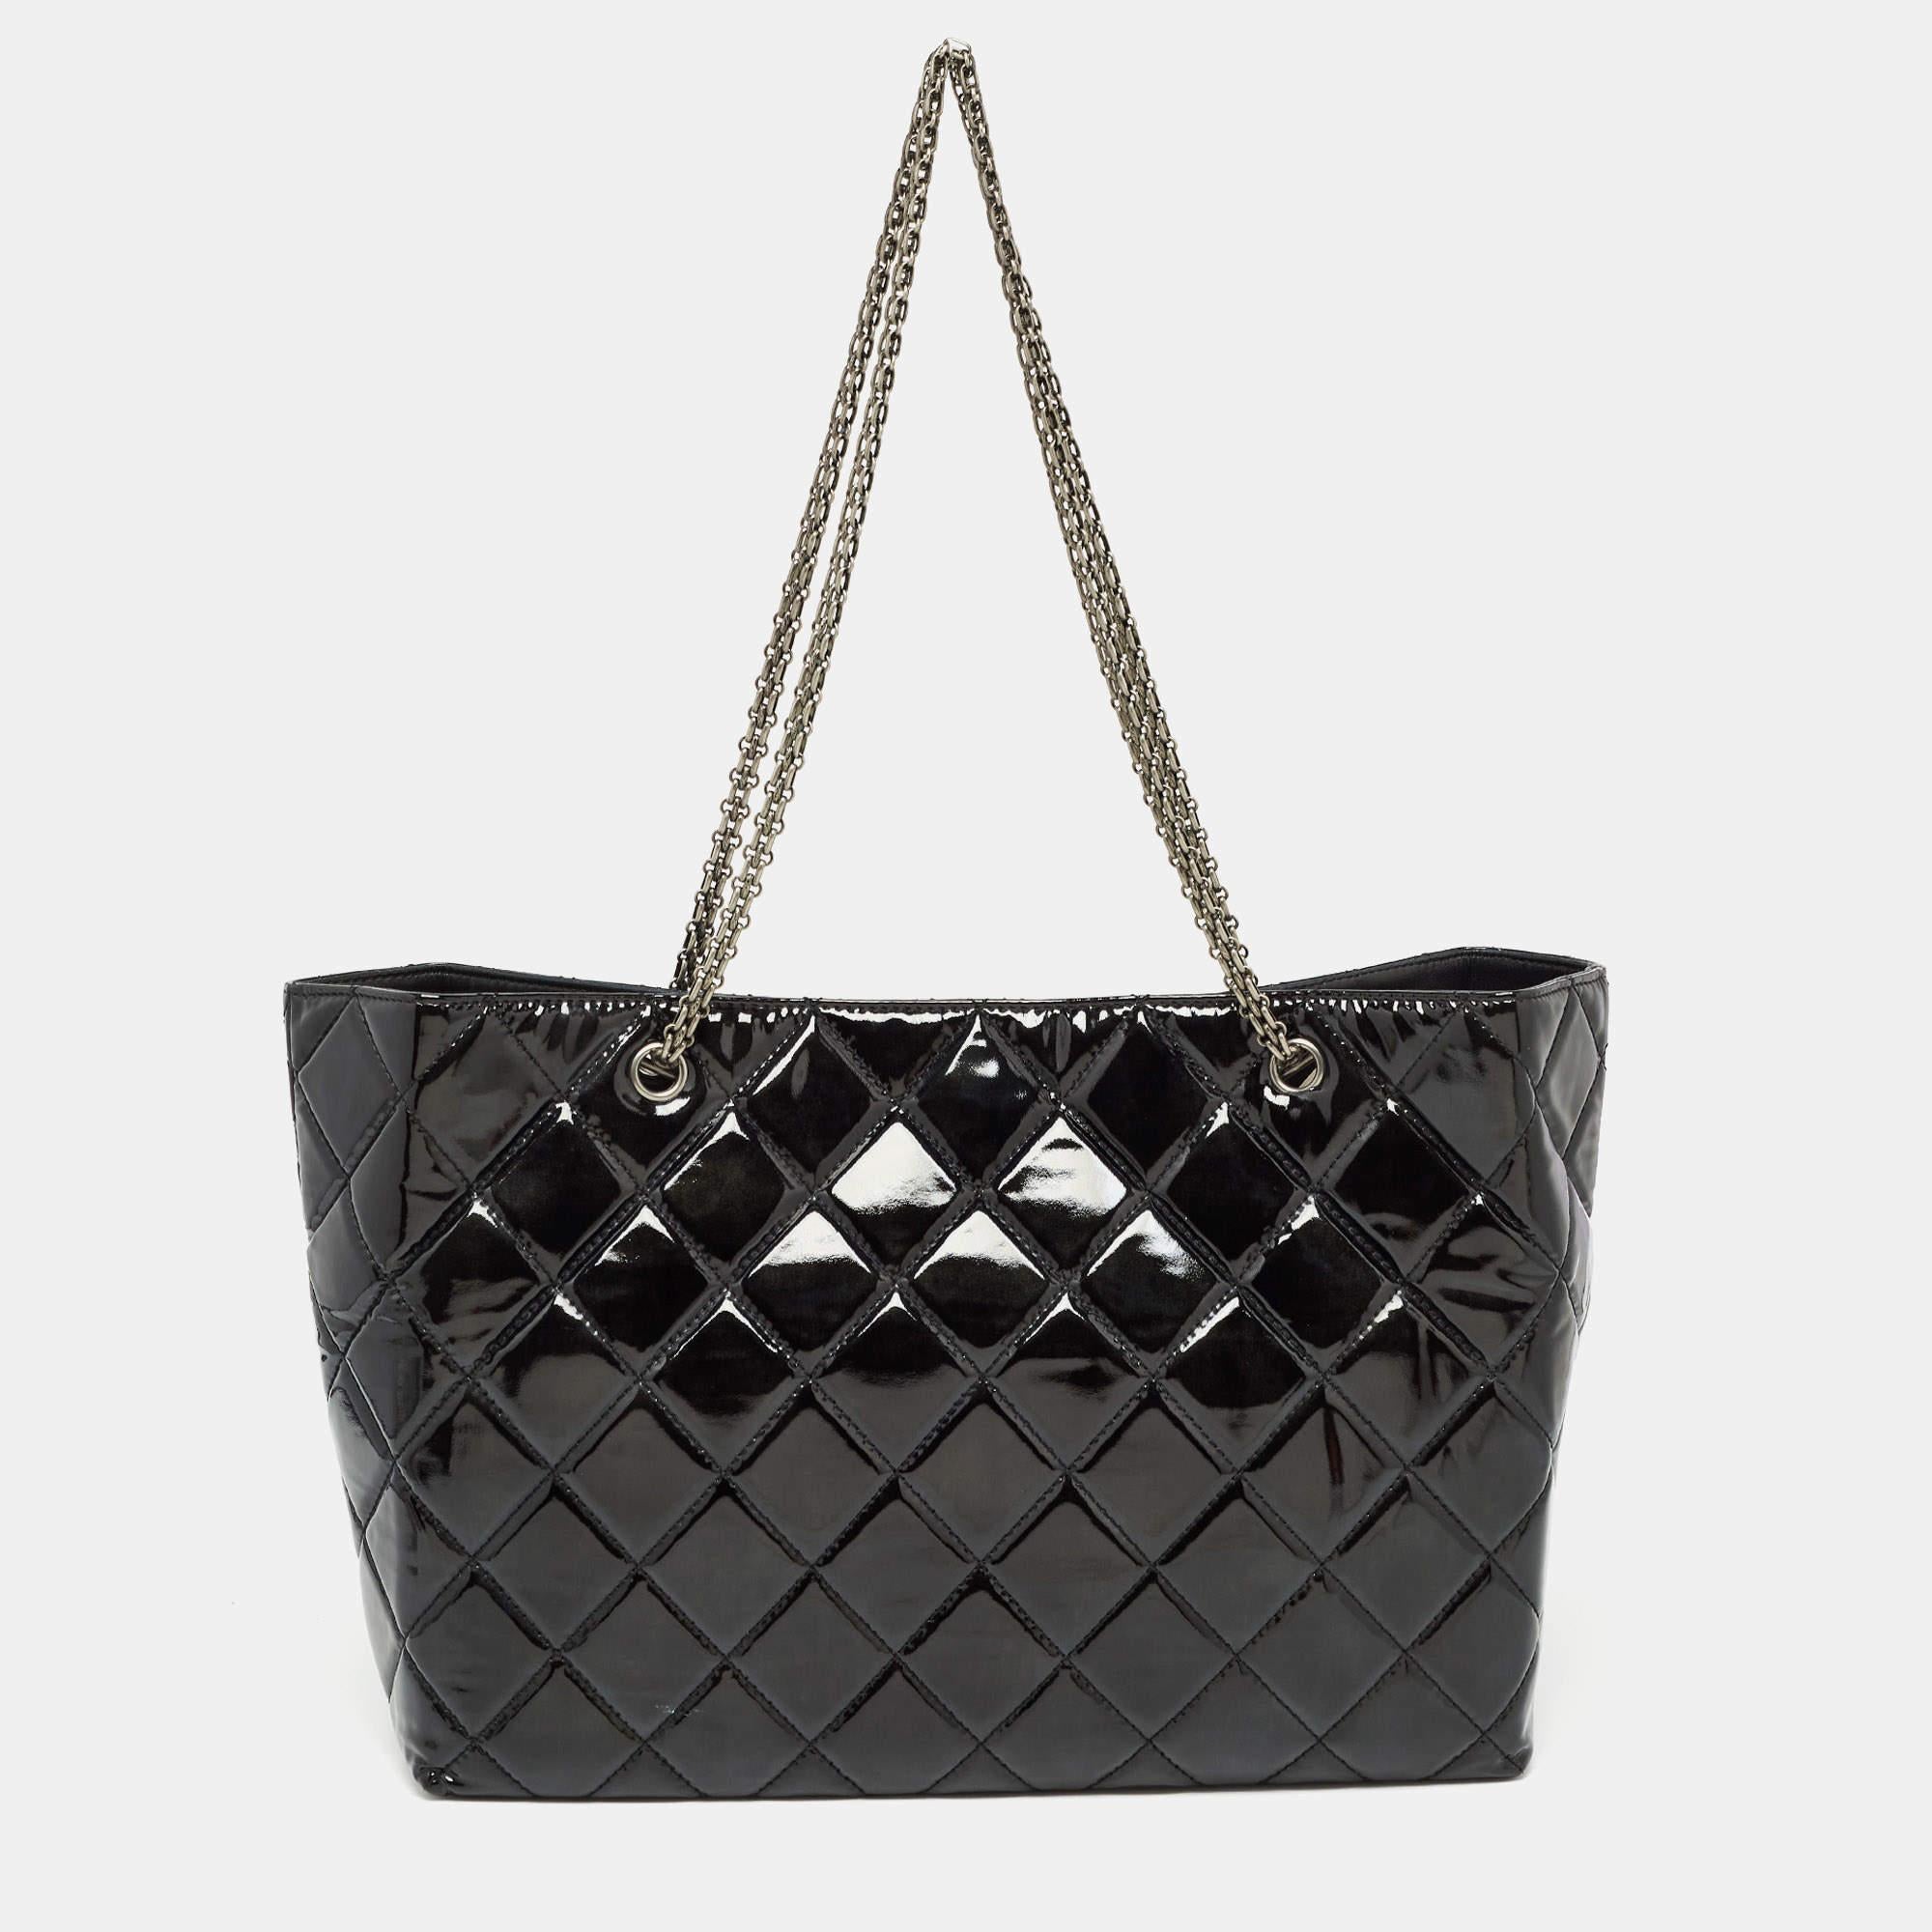 This Reissue East West tote from the House of Chanel is great for everyday use. It has a patent leather exterior with dual chain handles and signature elements. It is provided with a spacious interior for all-day ease.

Includes: Original Dustbag

